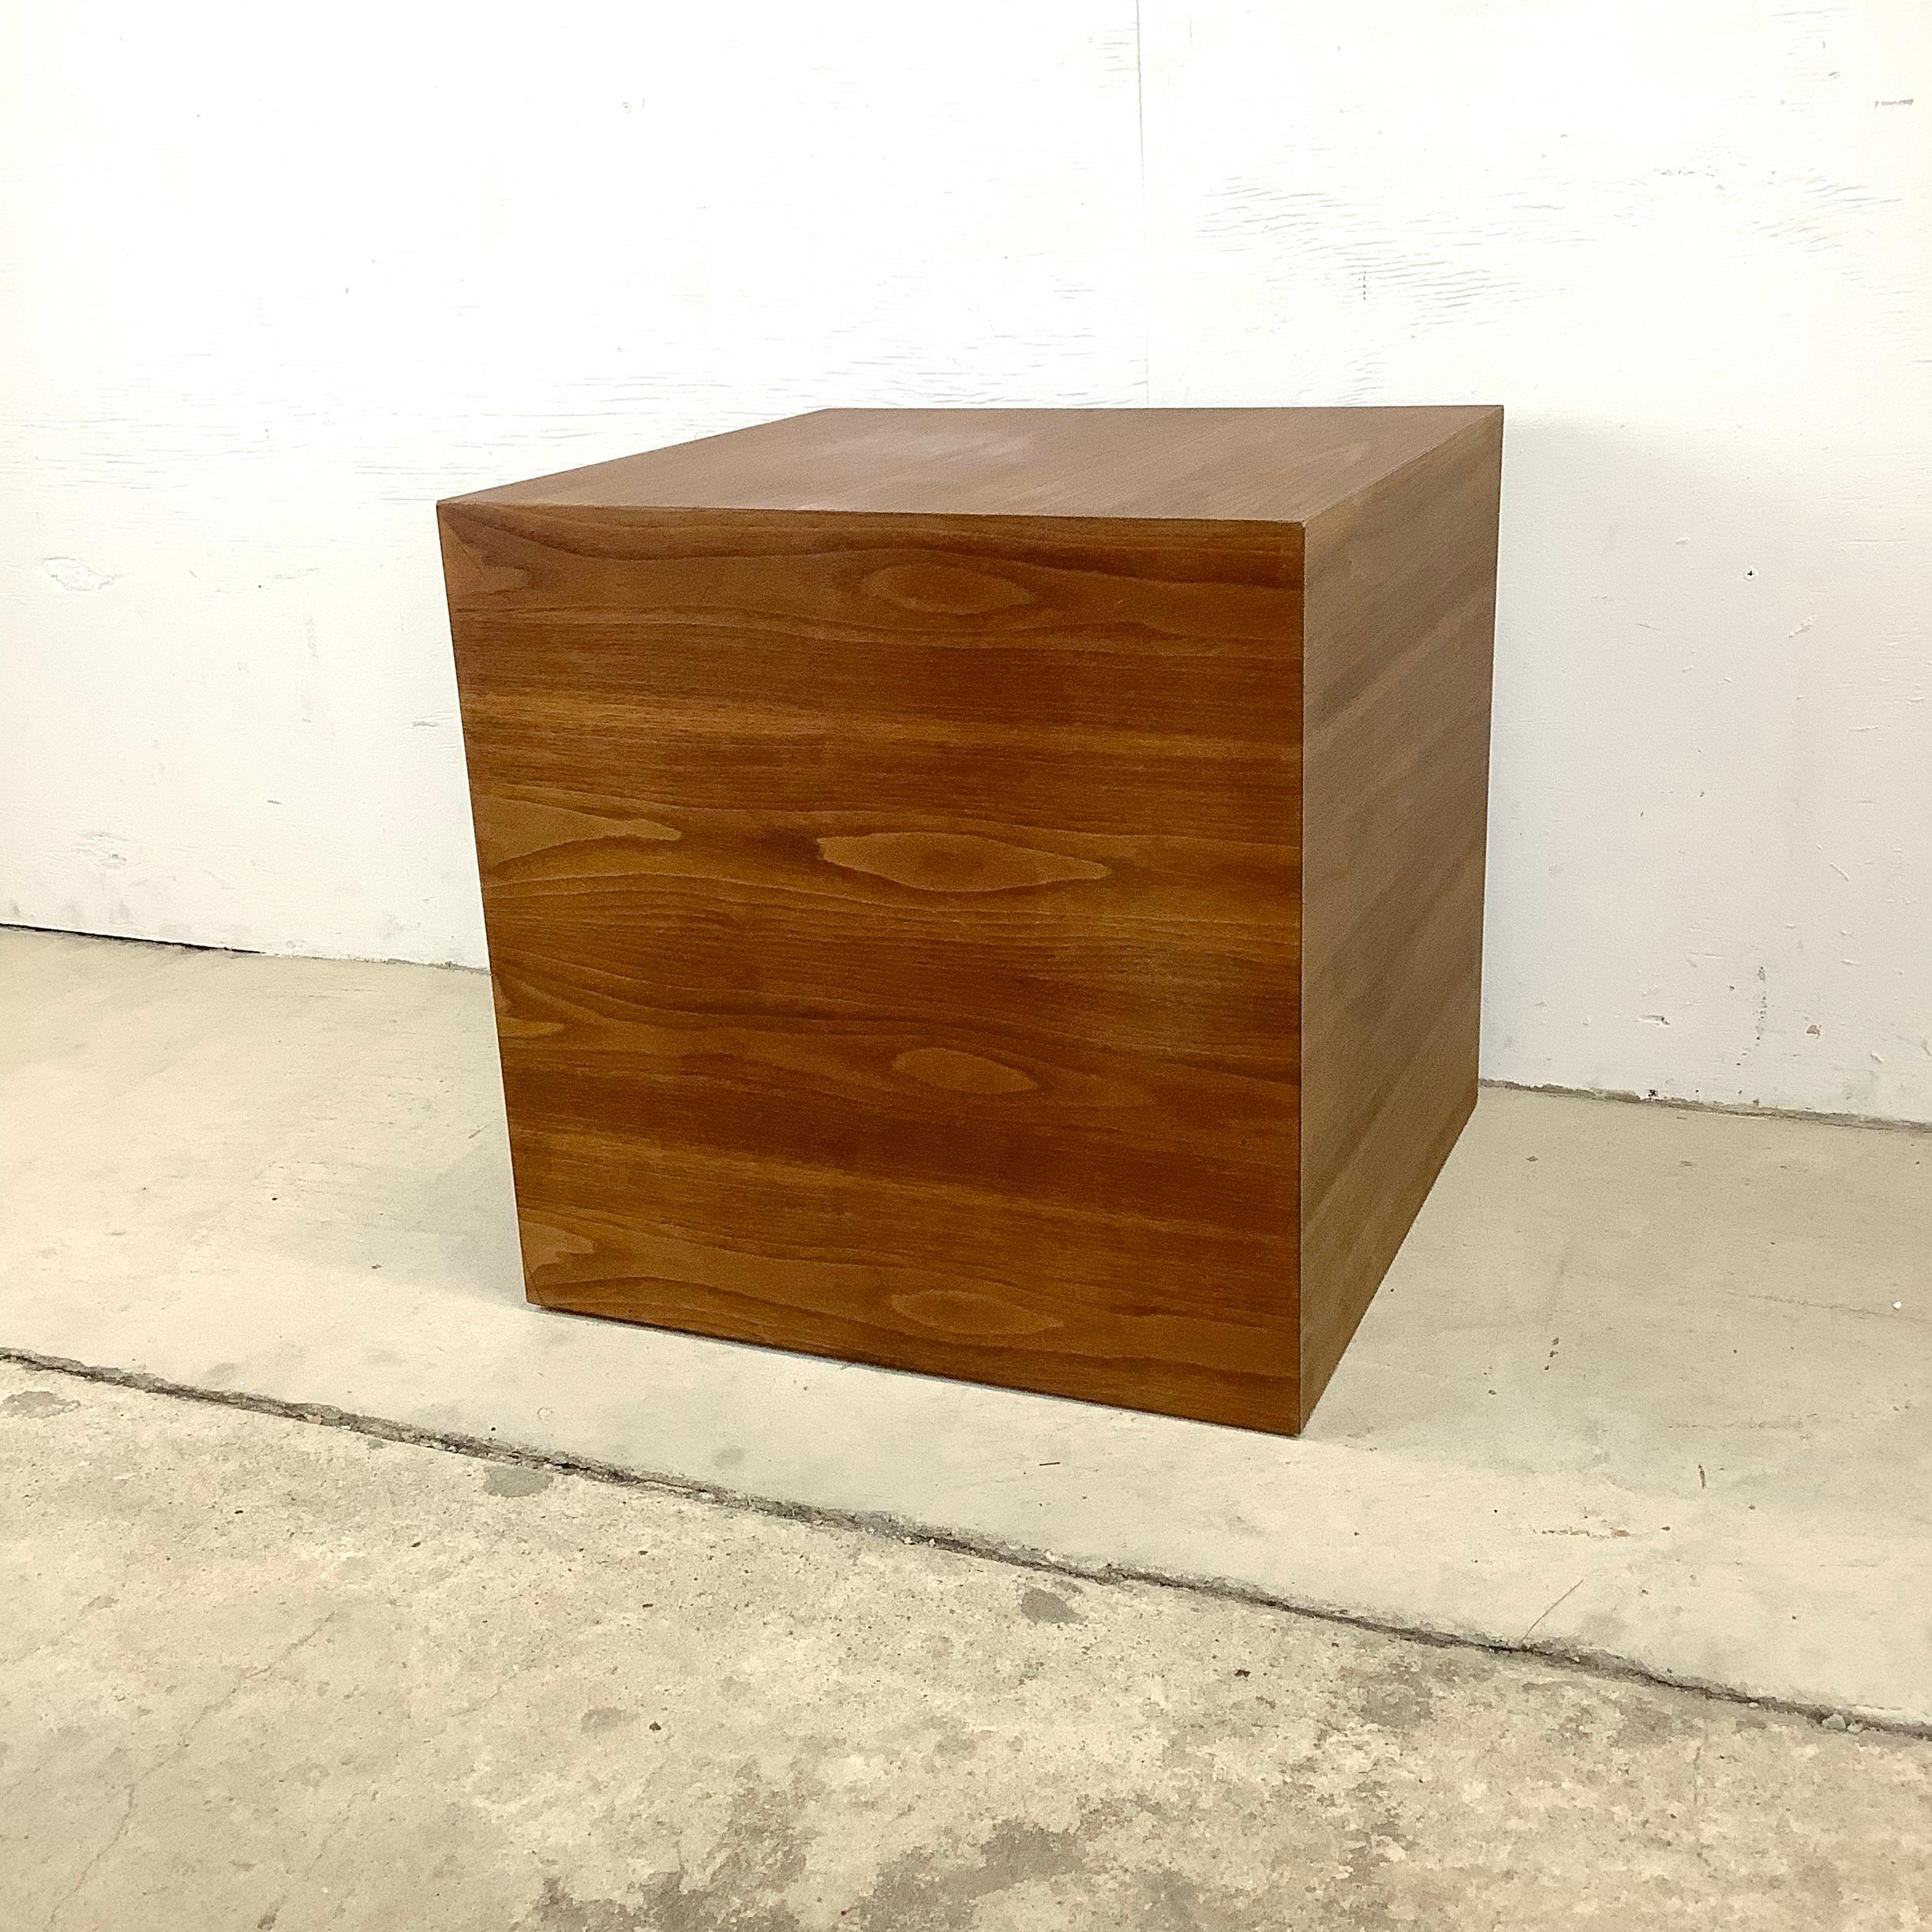 This mid-century walnut cube table makes the perfect sofa side table, lamp table, or end table for any setting. The clean modern lines and rich vintage walnut finish add warm mid-century style to any setting.

Dimensions: 20w 20d 20h

Condition: